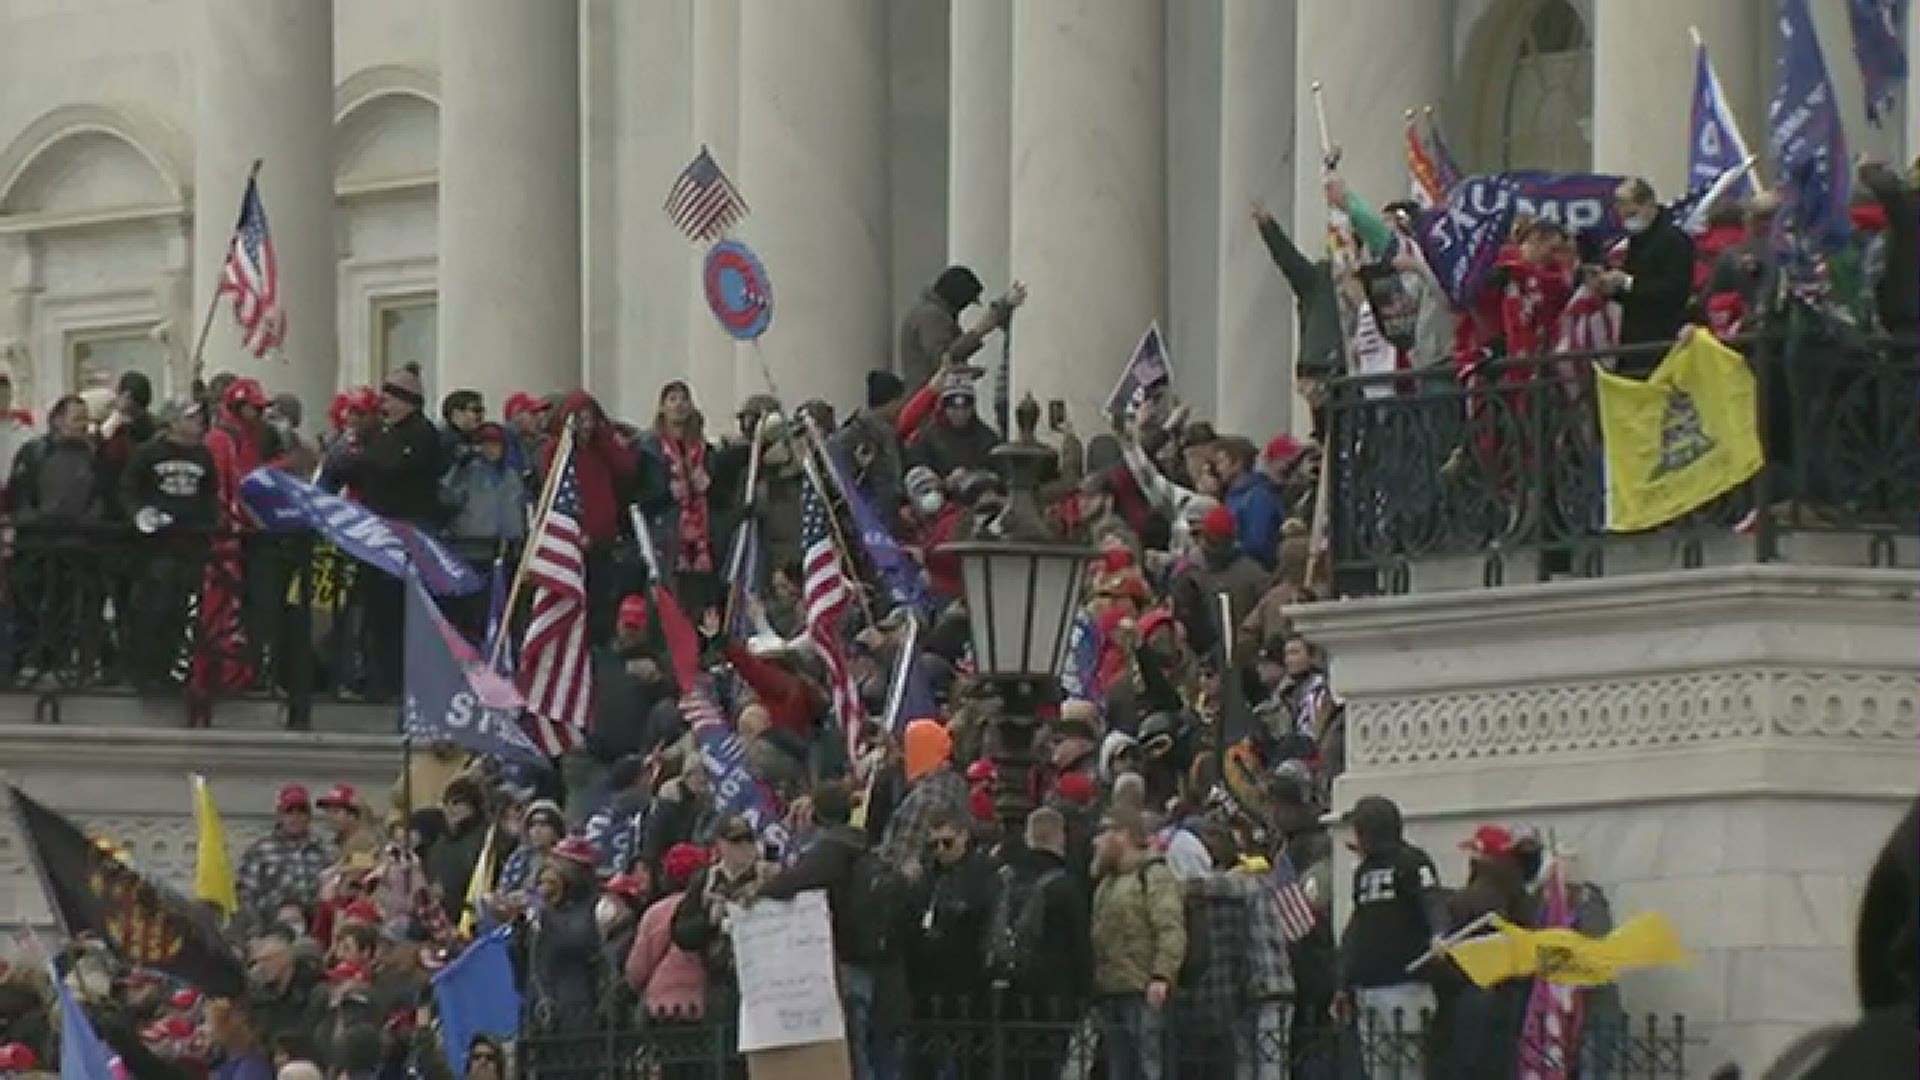 Angry supporters of President Donald Trump have stormed the U.S. Capitol in a chaotic protest aimed at thwarting a peaceful transfer of power.